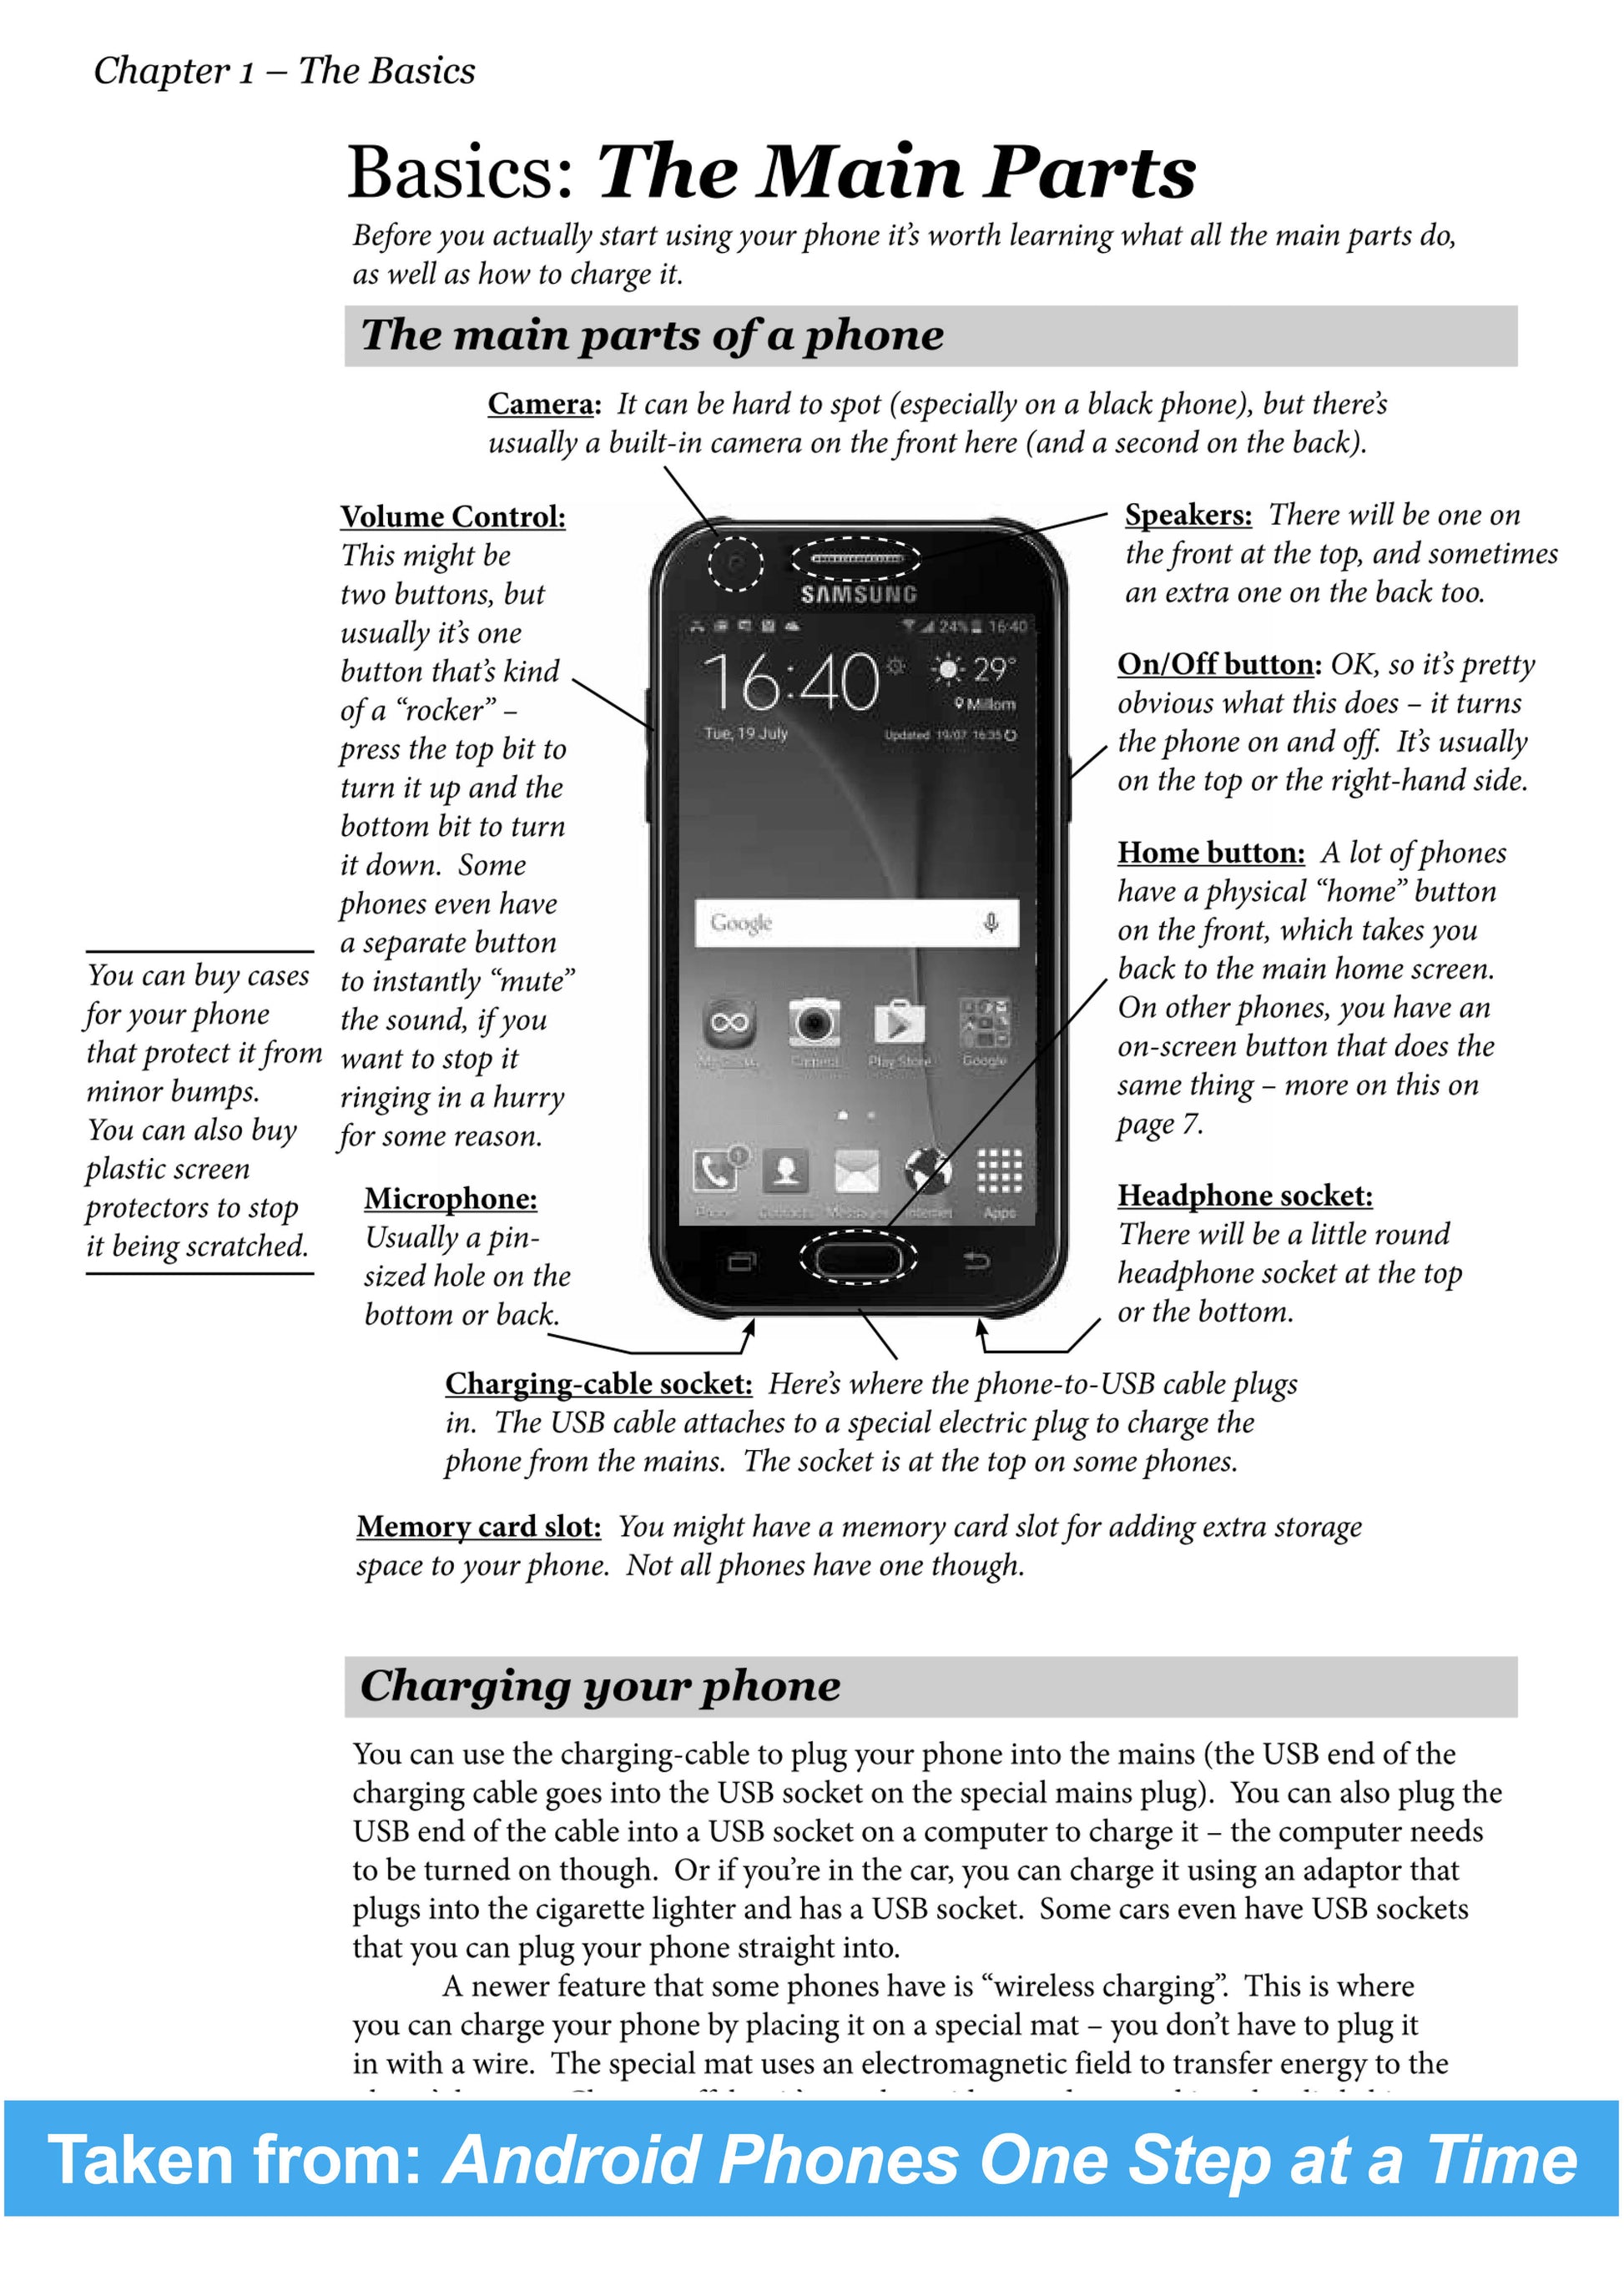 Sample page from Android phones One Step at a Time